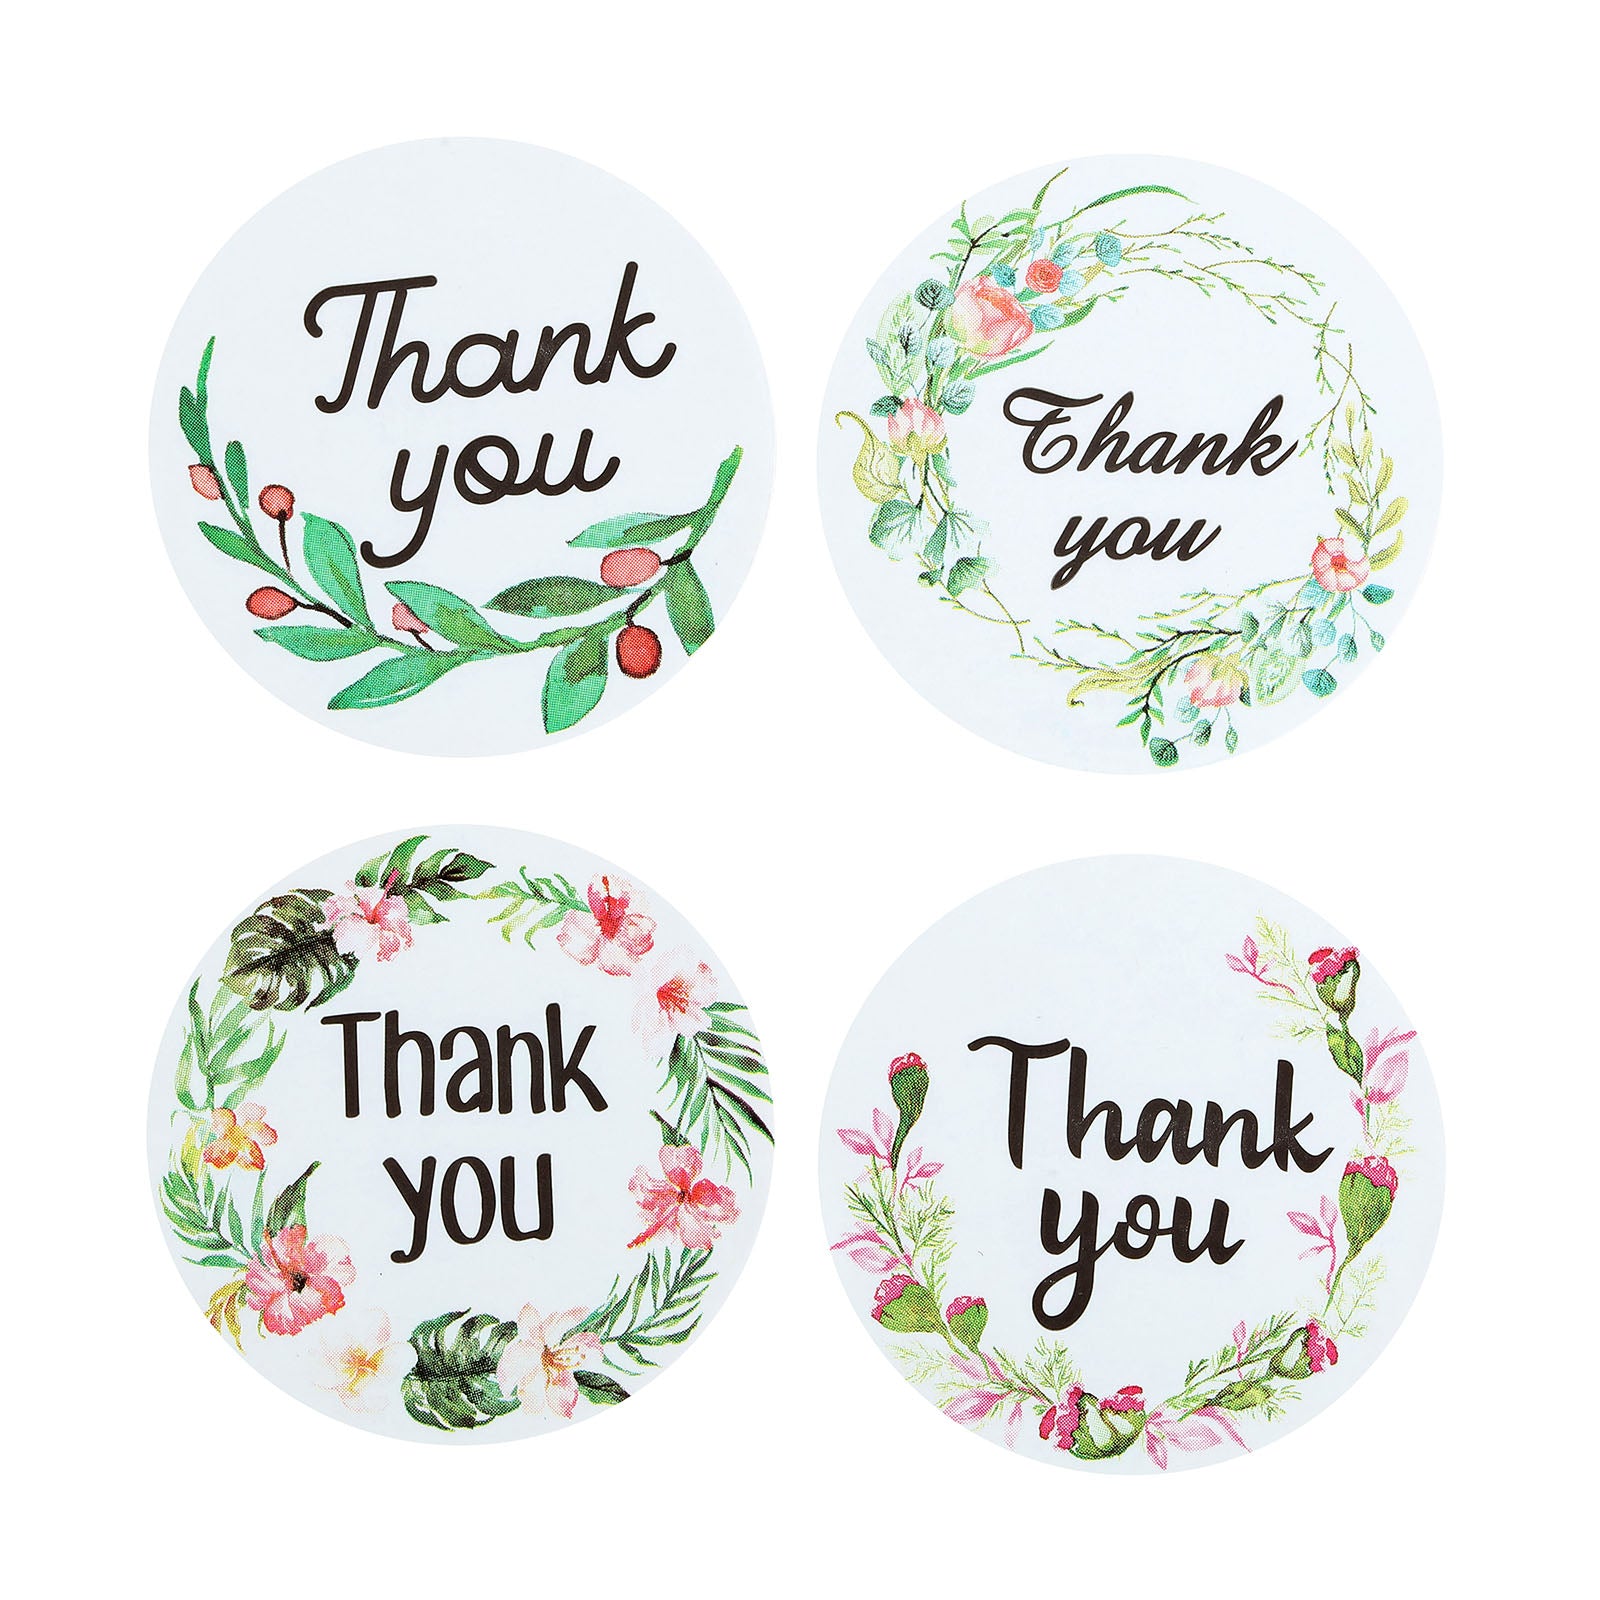 Efavormart 500pcs - 1.5 inch Round Thank You Stickers Roll with Purple Foil Text Floral Design, DIY Envelope Seal Labels for DIY, Party, Weddings